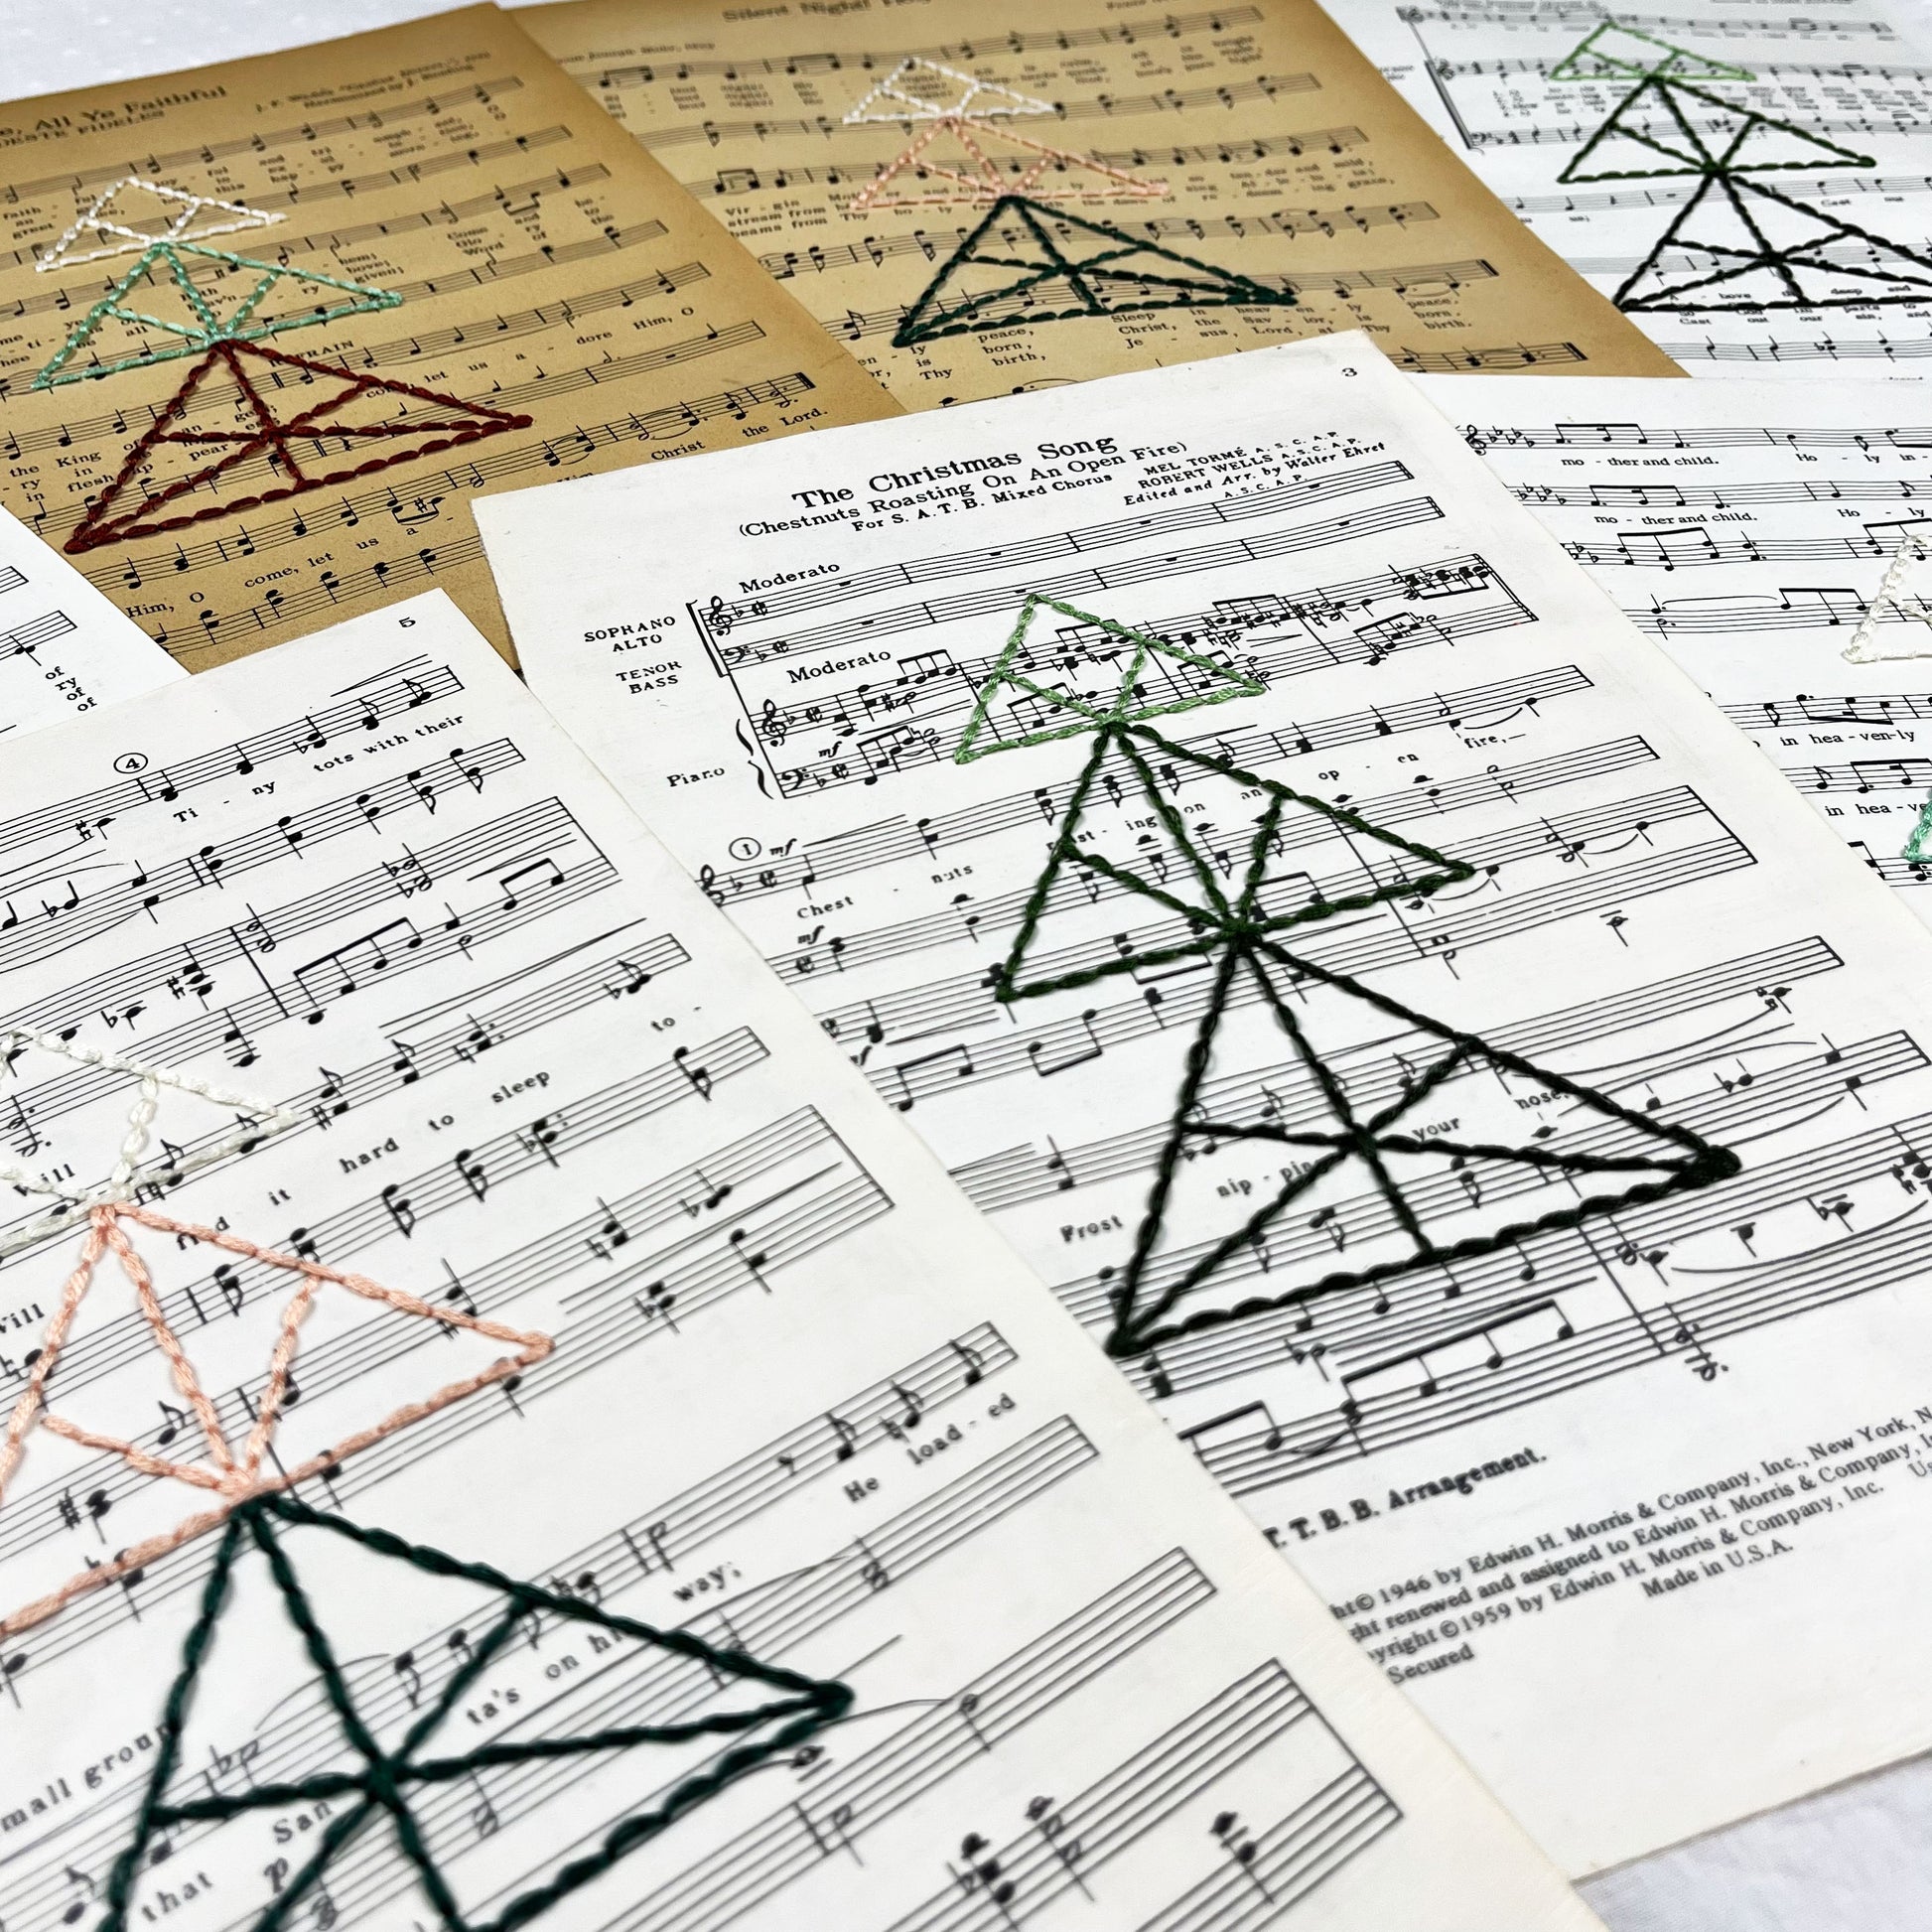 close up angled view of a group of sheet music from Christmas songs, hand stitched over with a Christmas tree made from triangles, in different color combinations